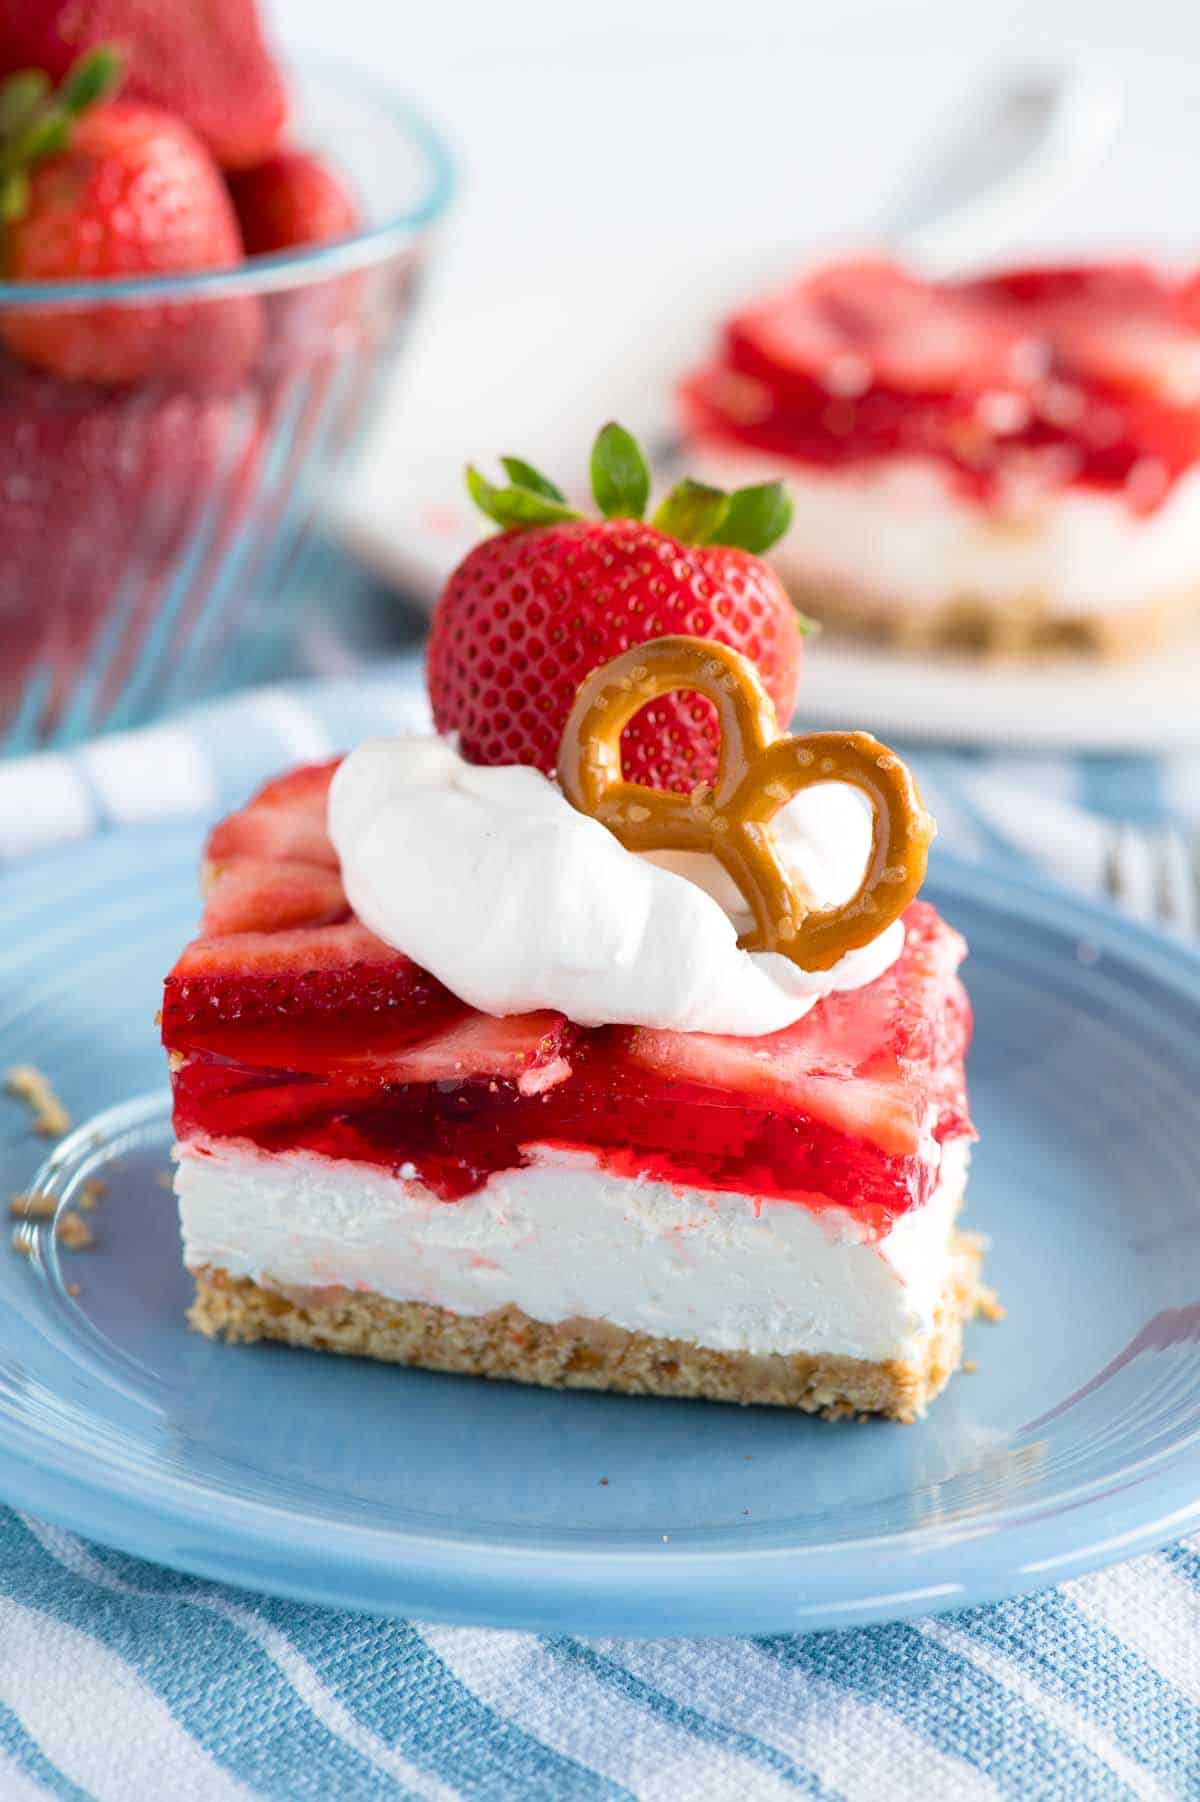 strawberry jello layered dessert on a plate garnished with whipped cream and a strawberry and twisted pretzel